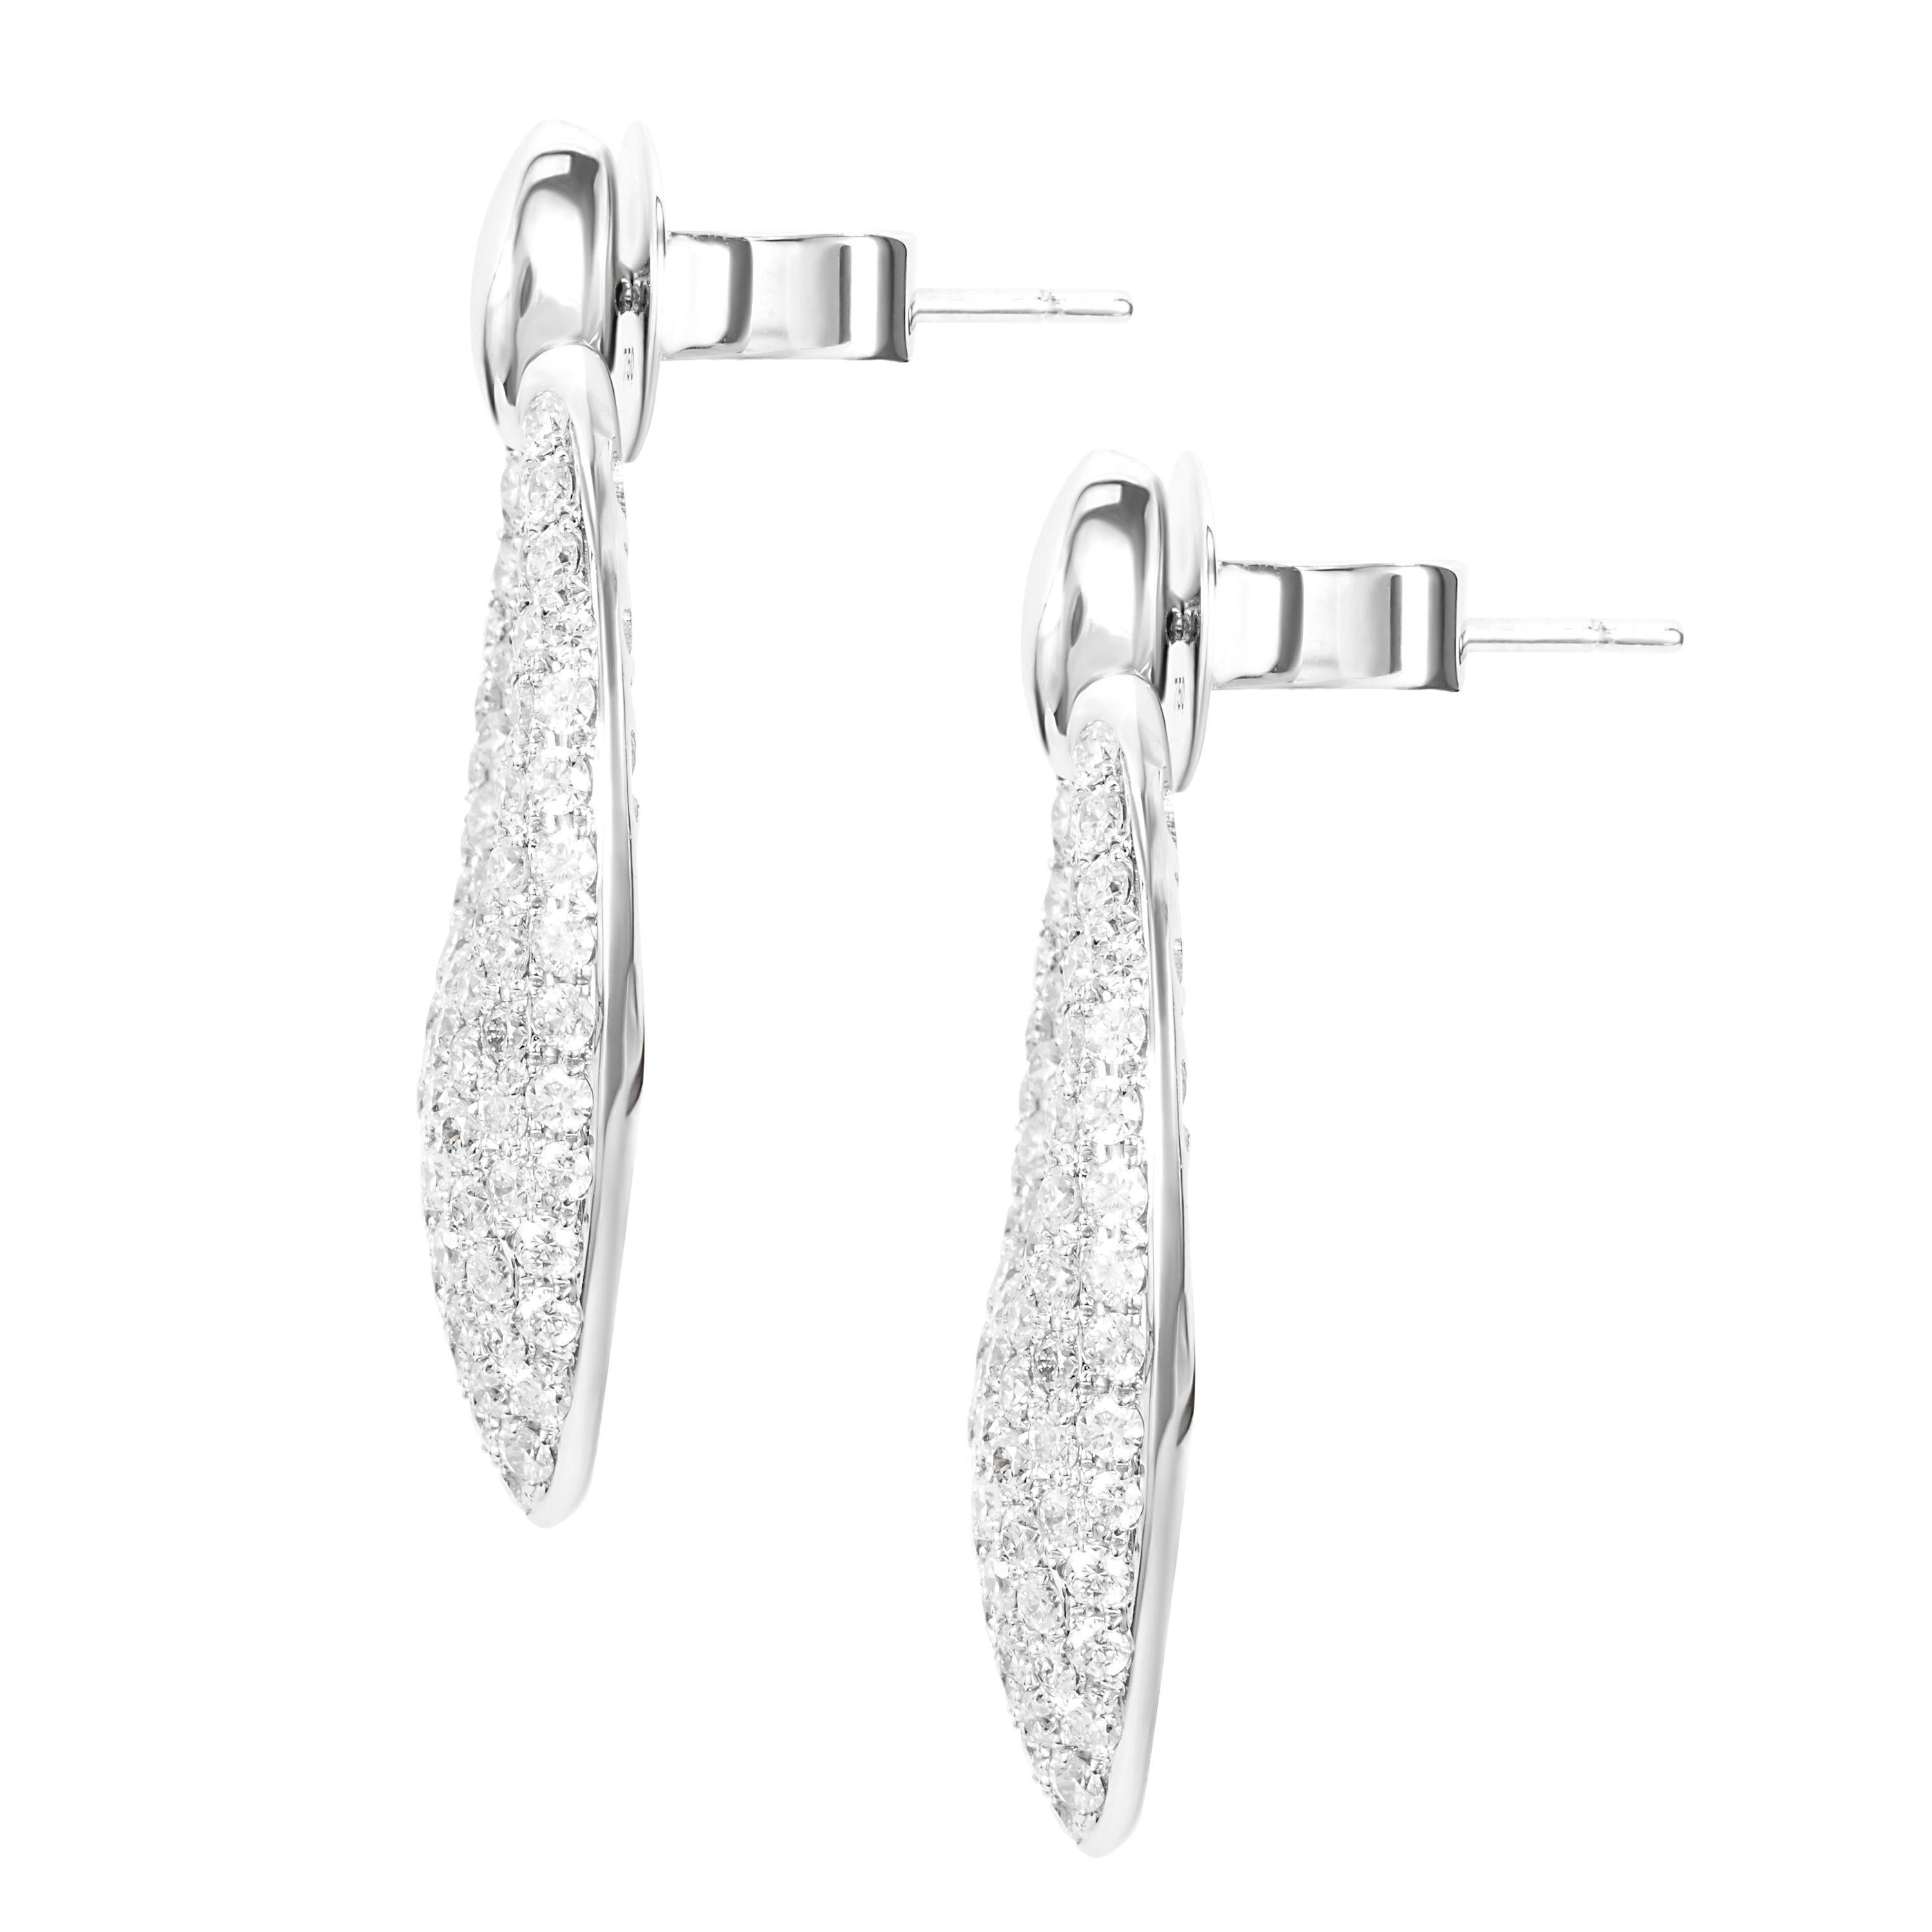 These classic diamond cluster drop earrings are expertly crafted with 2.81 carats of glistening pavé set round diamonds.  In 18K White Gold.  Earring length 3.5cm.

Composition:
18K White Gold
188 Round Diamonds: 2.81 carats
Diamond quality: G-H